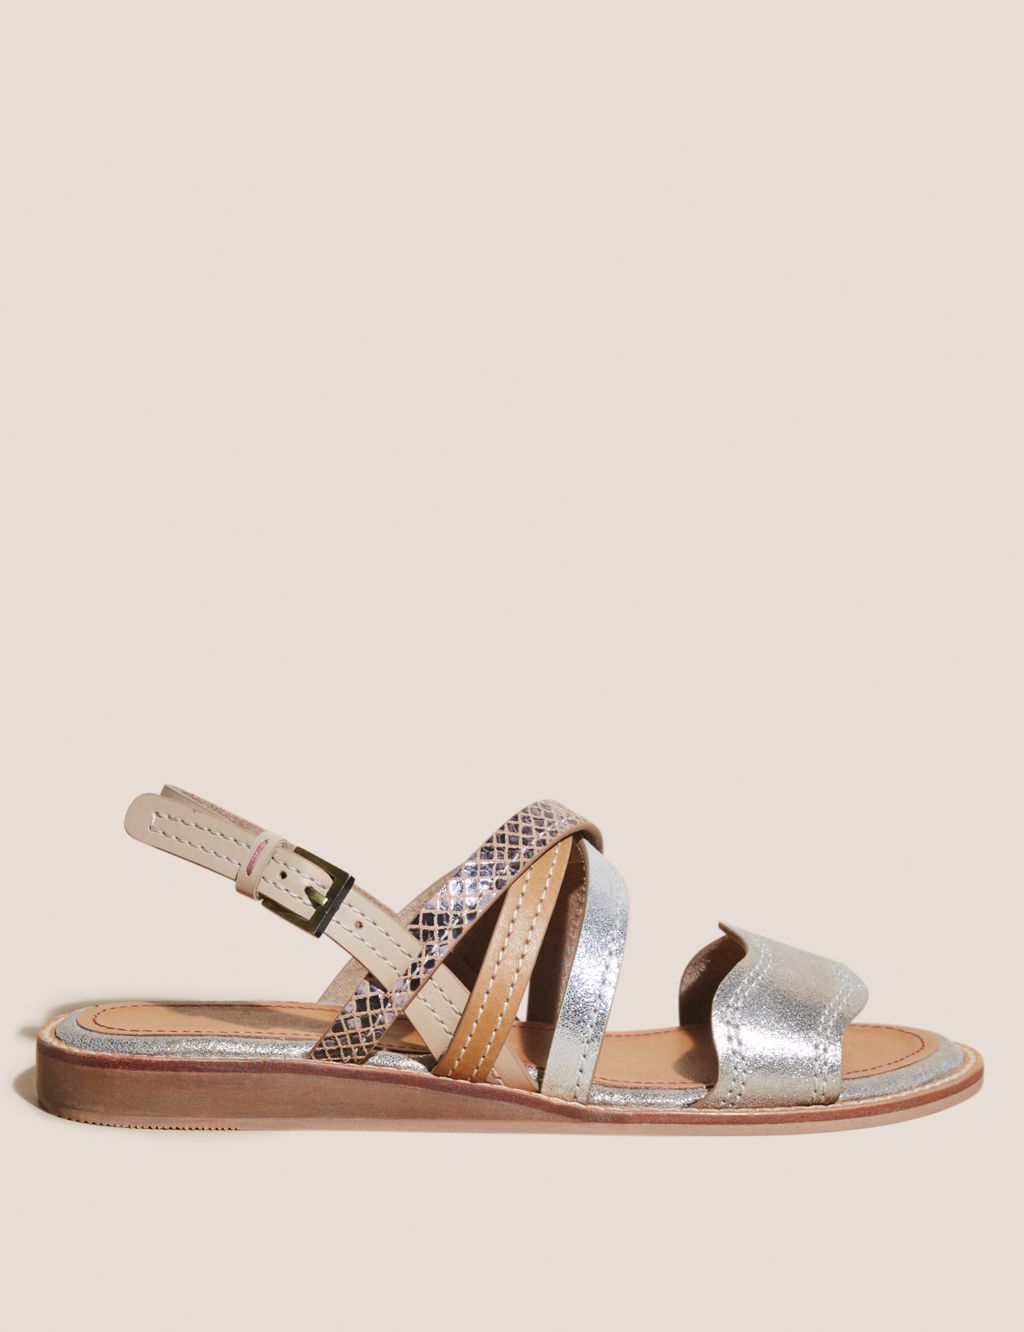 Leather Metallic Strappy Wedge Sandals image 1